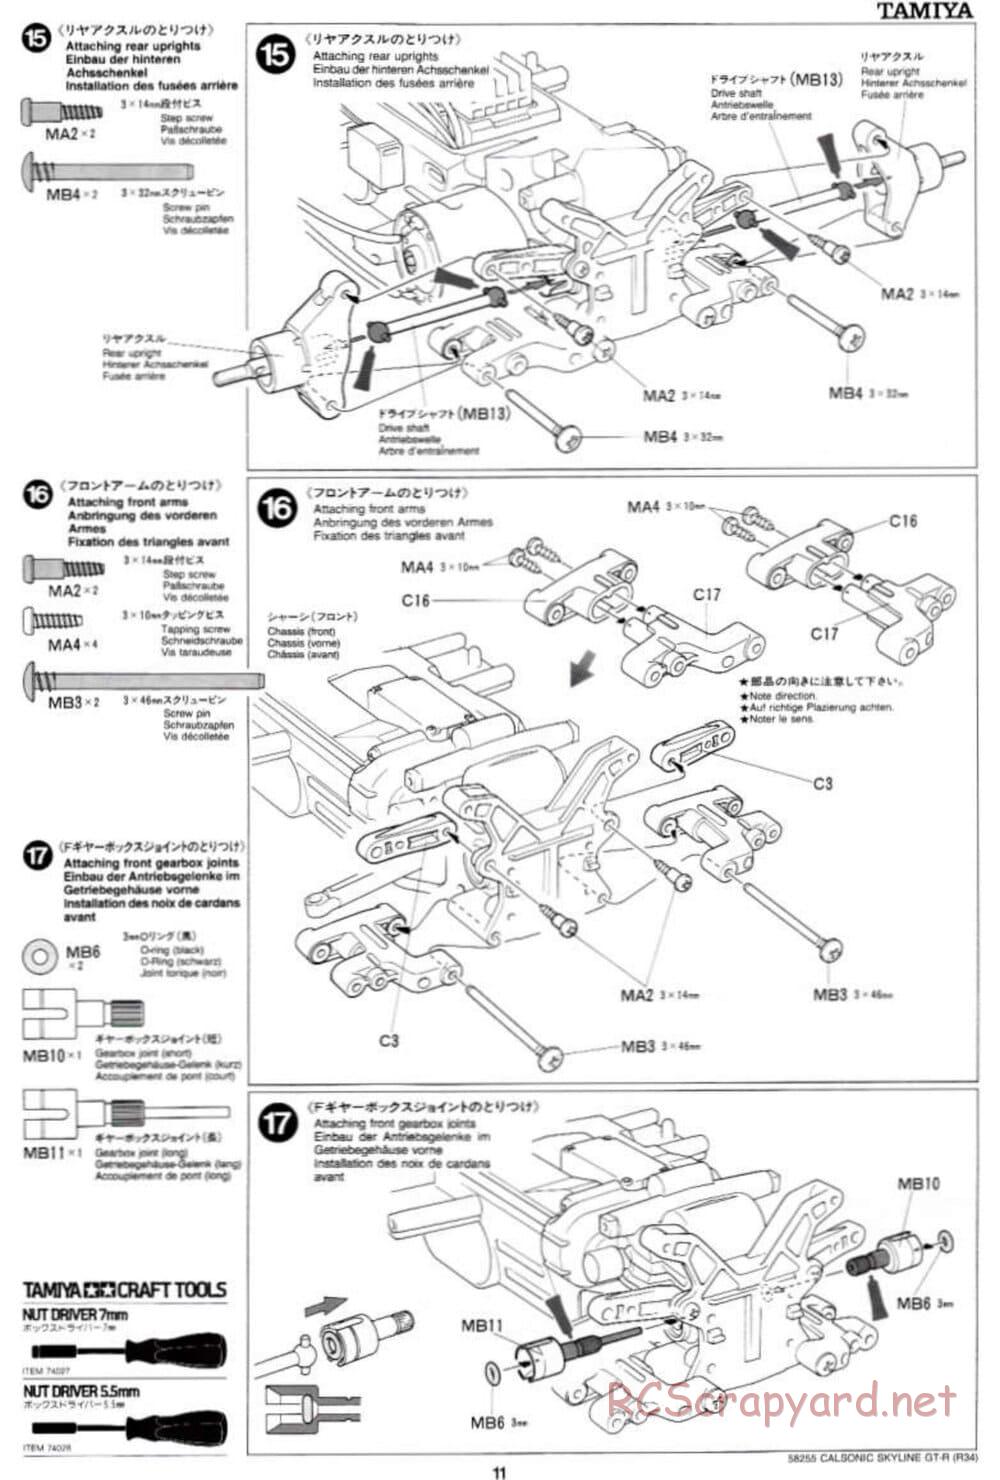 Tamiya - Calsonic Skyline GT-R (R34) - TL-01 Chassis - Manual - Page 11